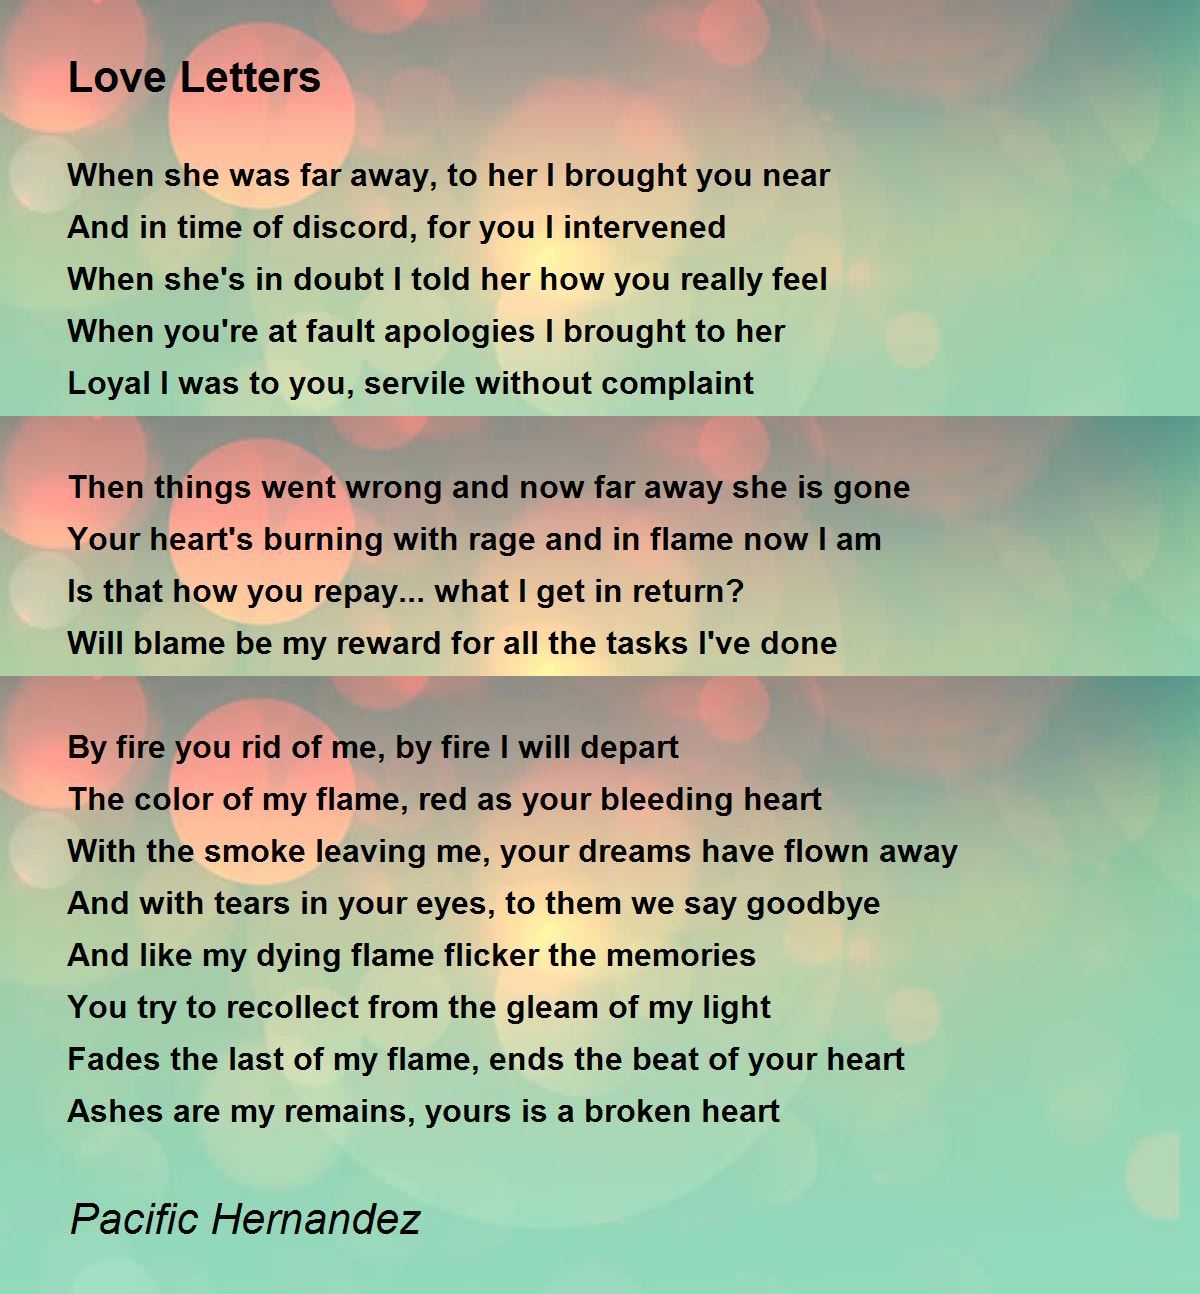 Romantic letters for her